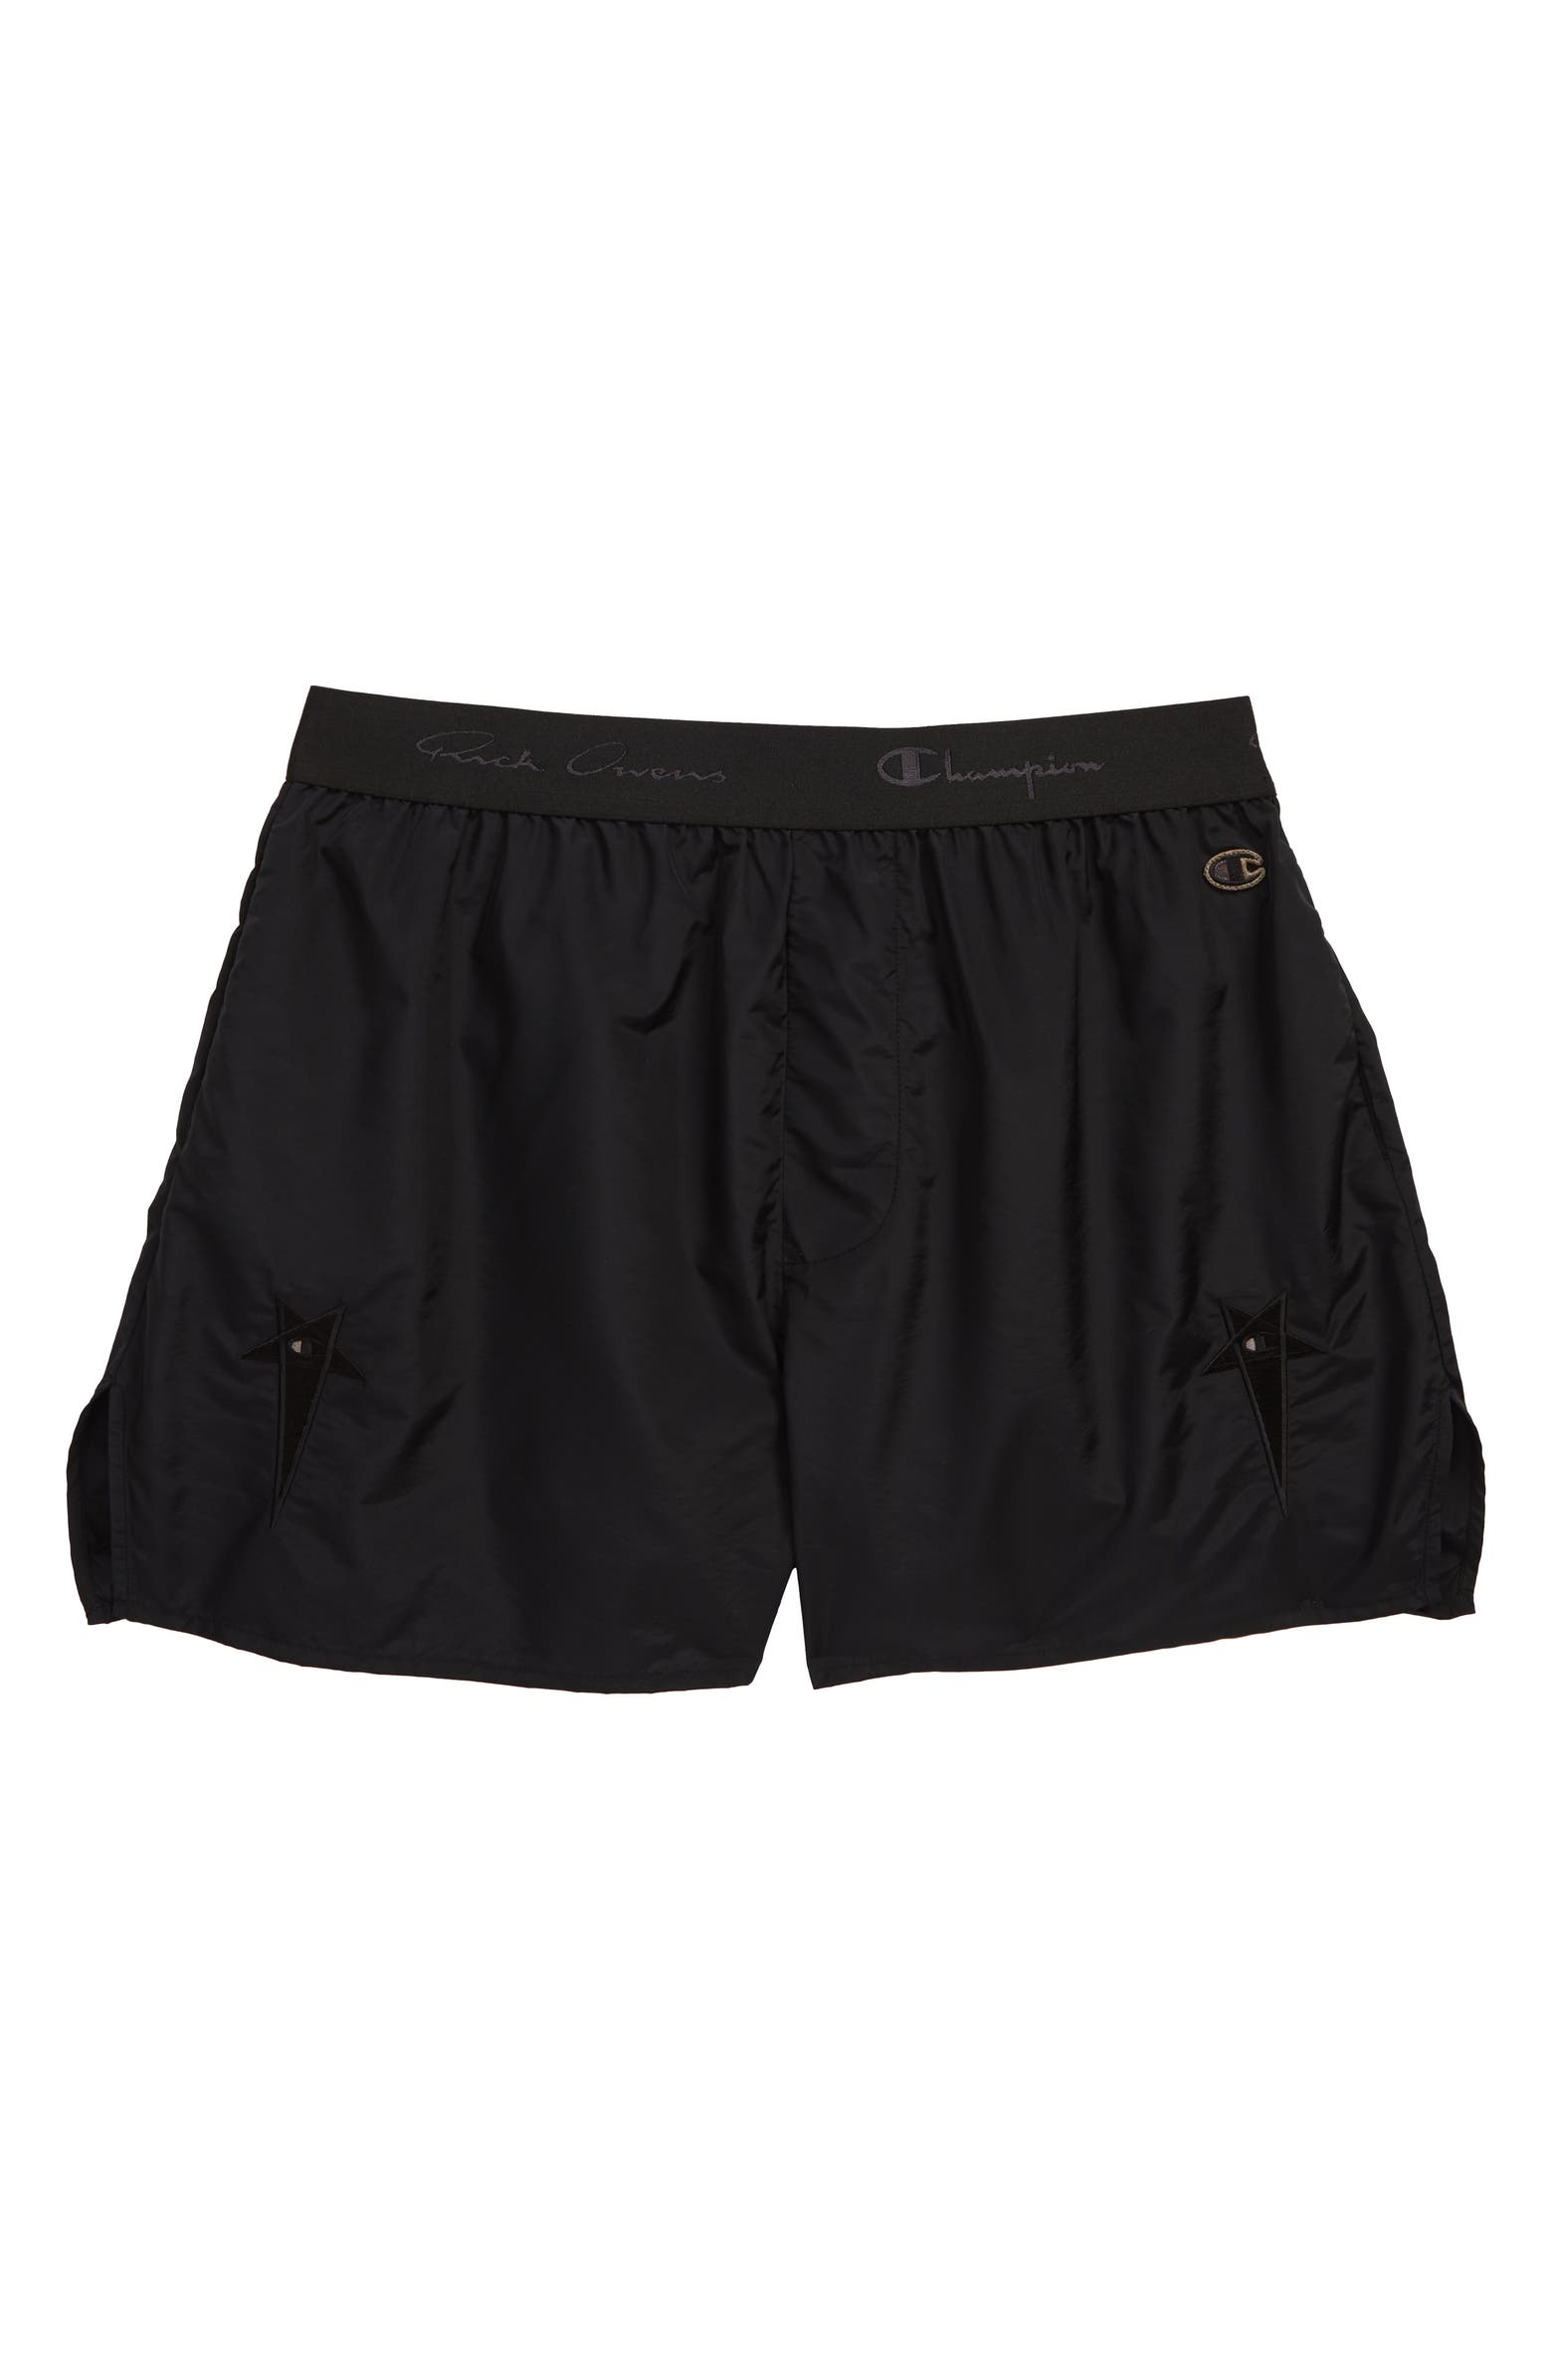 Rick Owens x Champion® Dolphin Boxers | Nordstrom